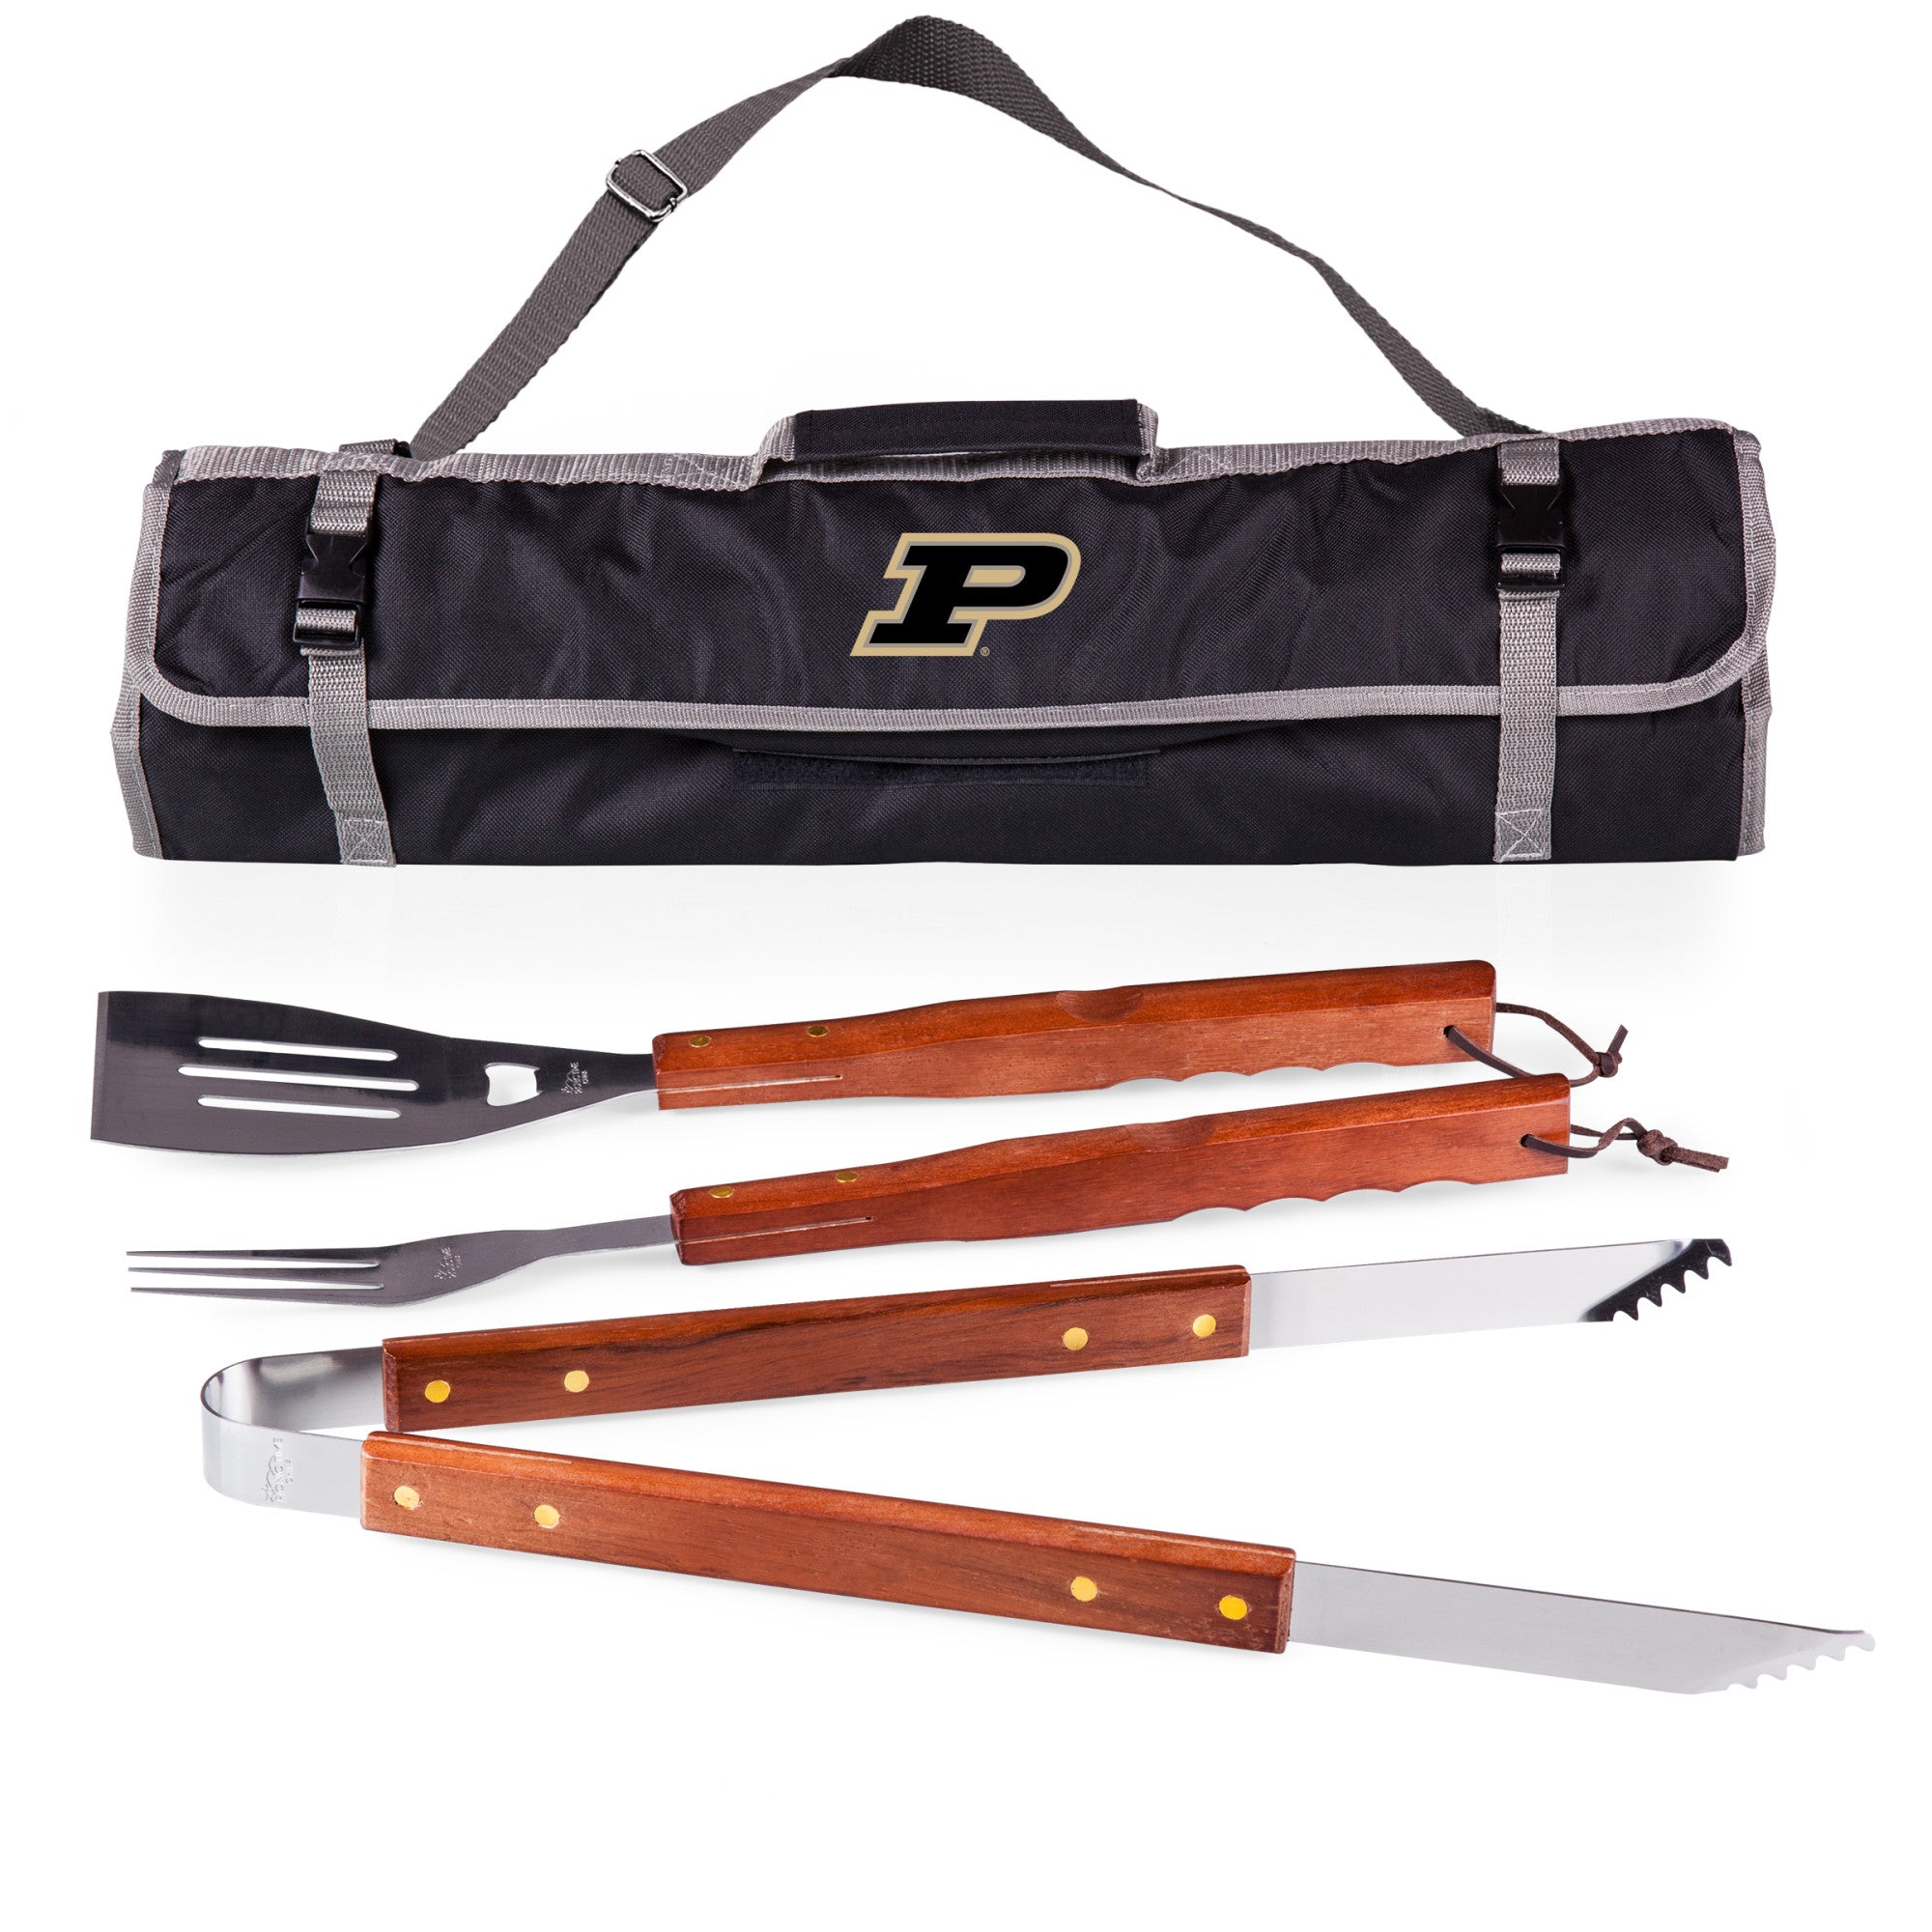 Purdue Boilermakers - 3-Piece BBQ Tote & Grill Set, (Black with Gray Accents)